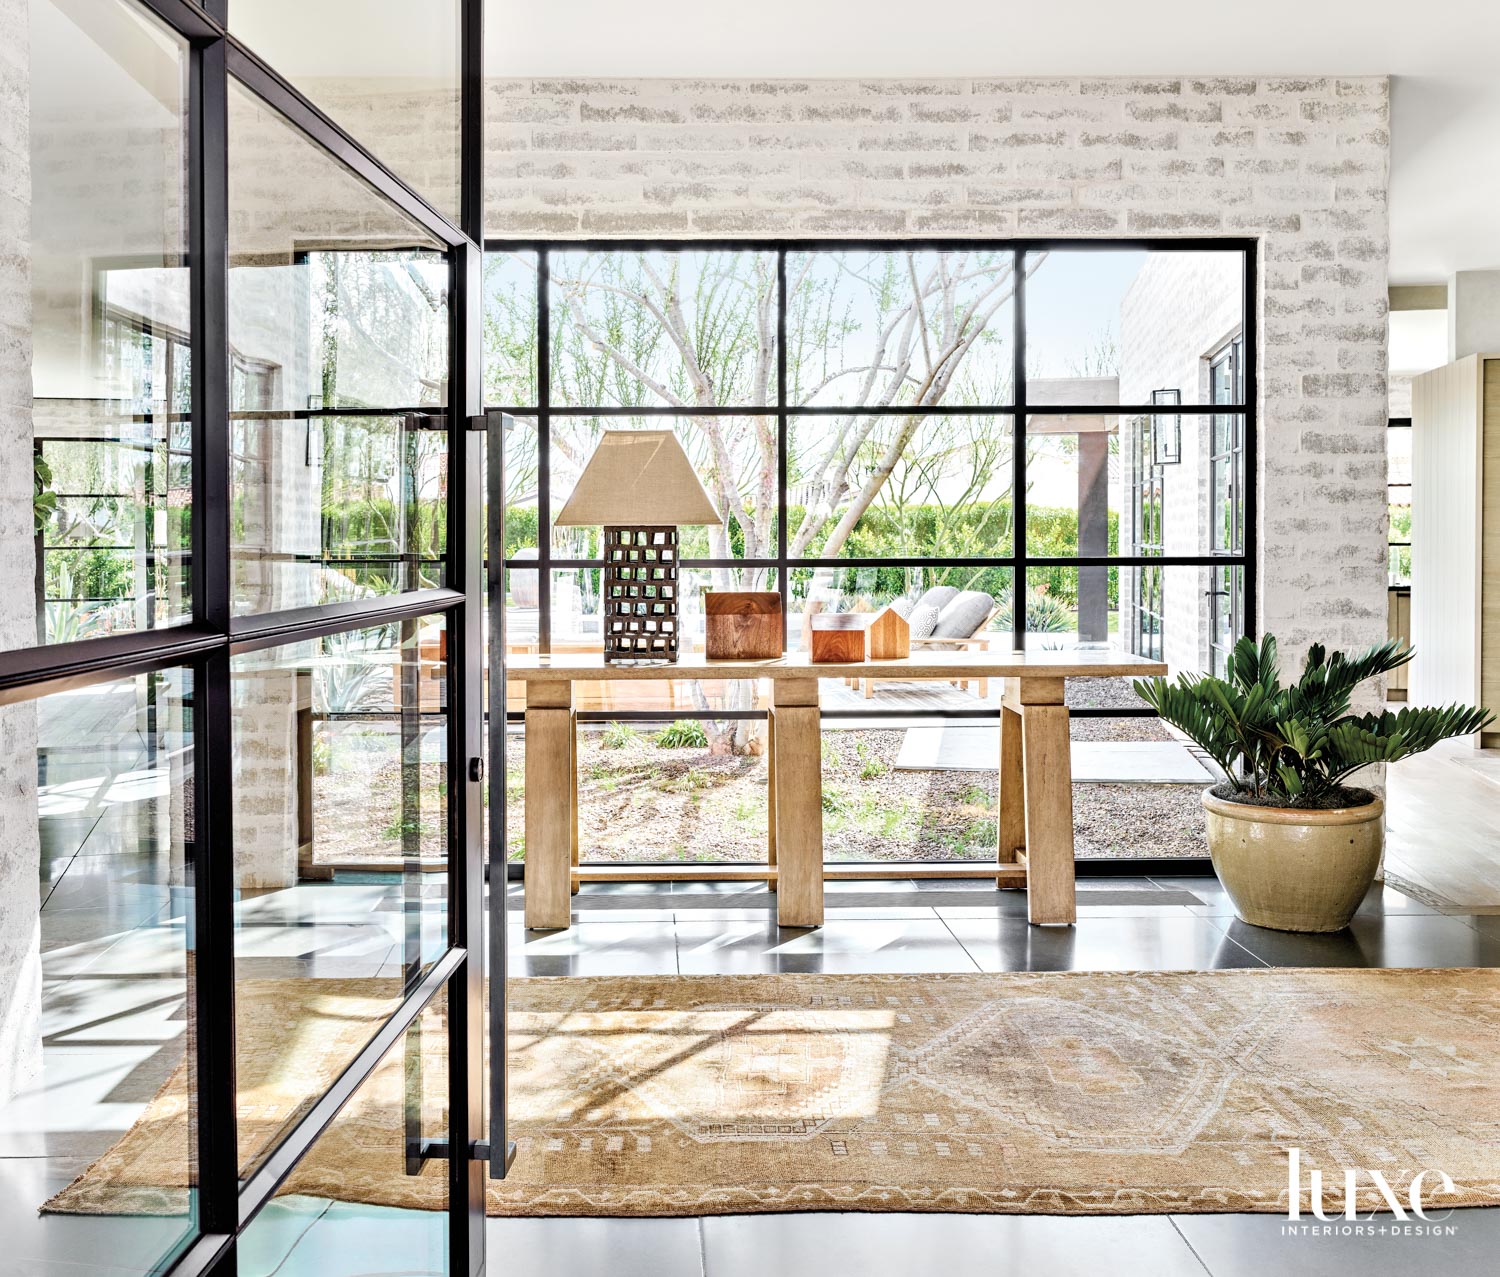 An entry-way with steel-and-glass windows, a light wood console and an antique rug.